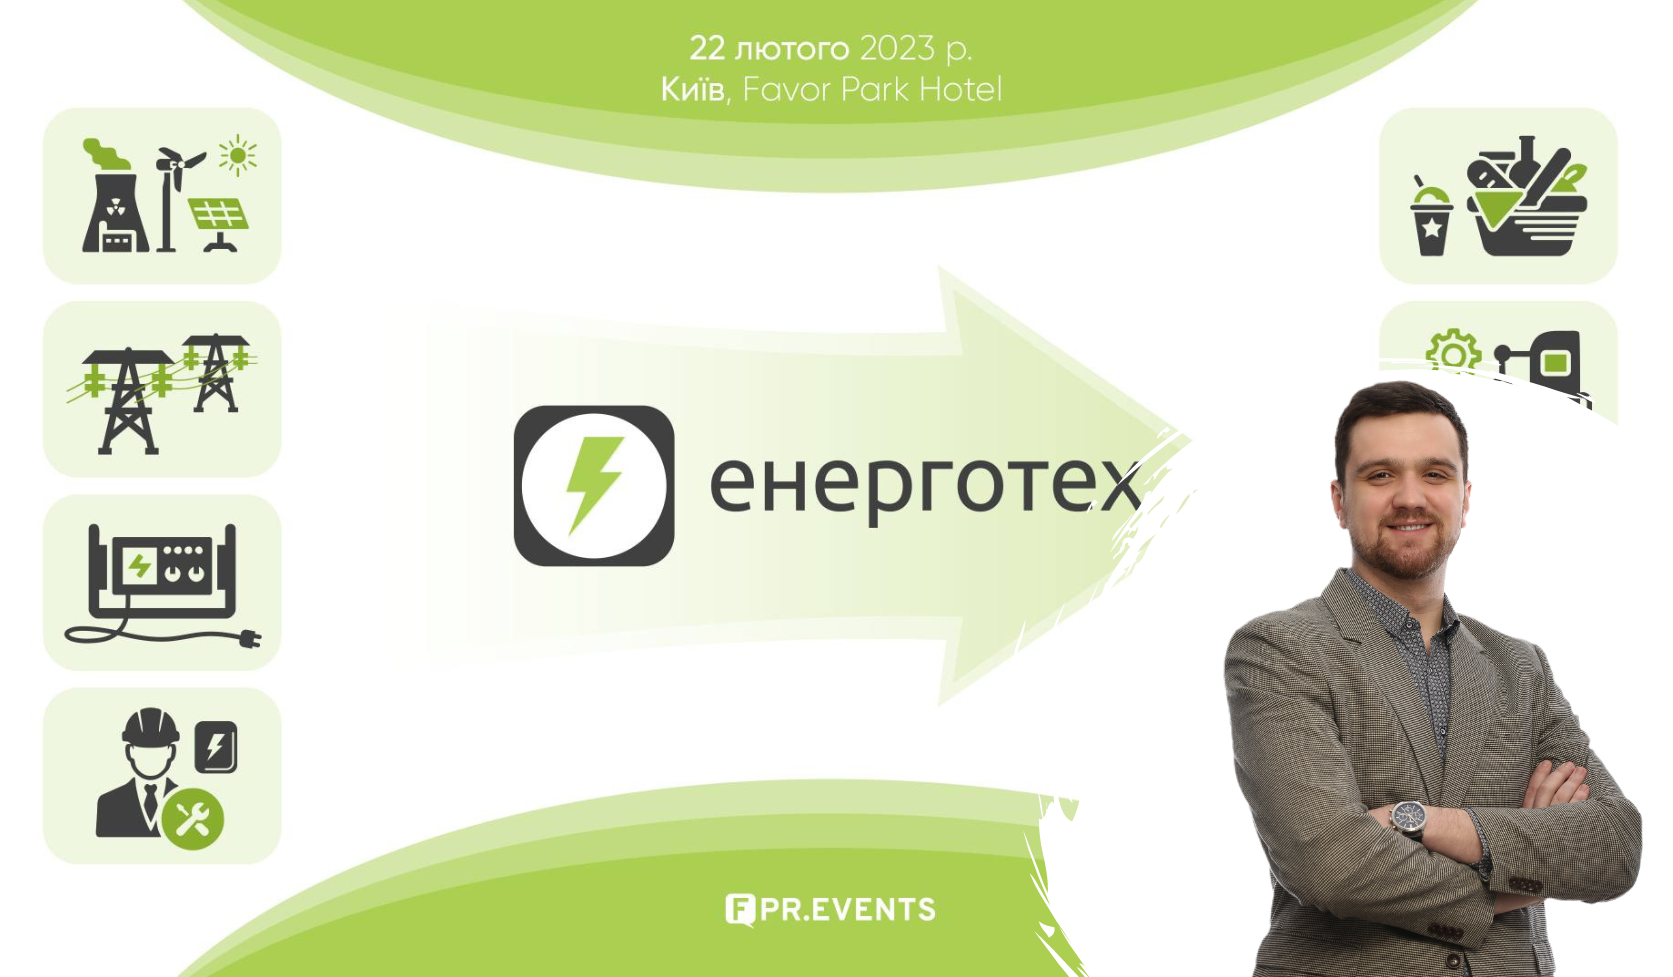 Pro-Consulting Senior Consultant Andrii Mokriakov will give an overview of the Ukrainian Energy Industry at the ENERGOTECH 2023 Conference